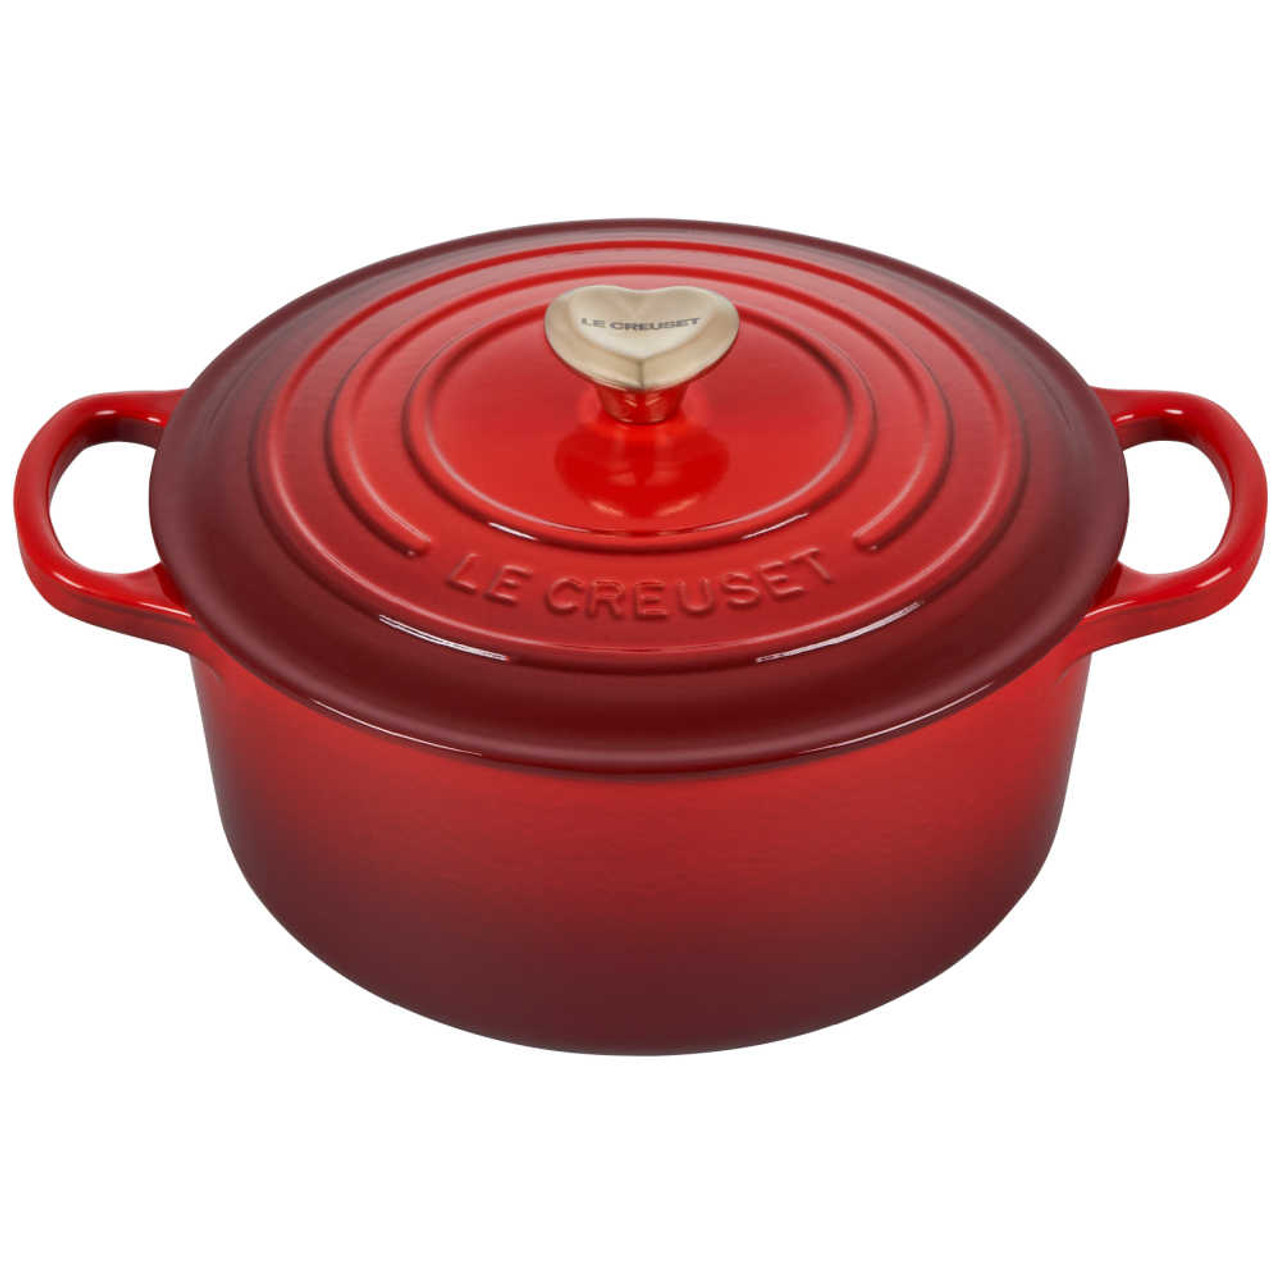 Le Creuset Round Dutch Oven With Heart Knob